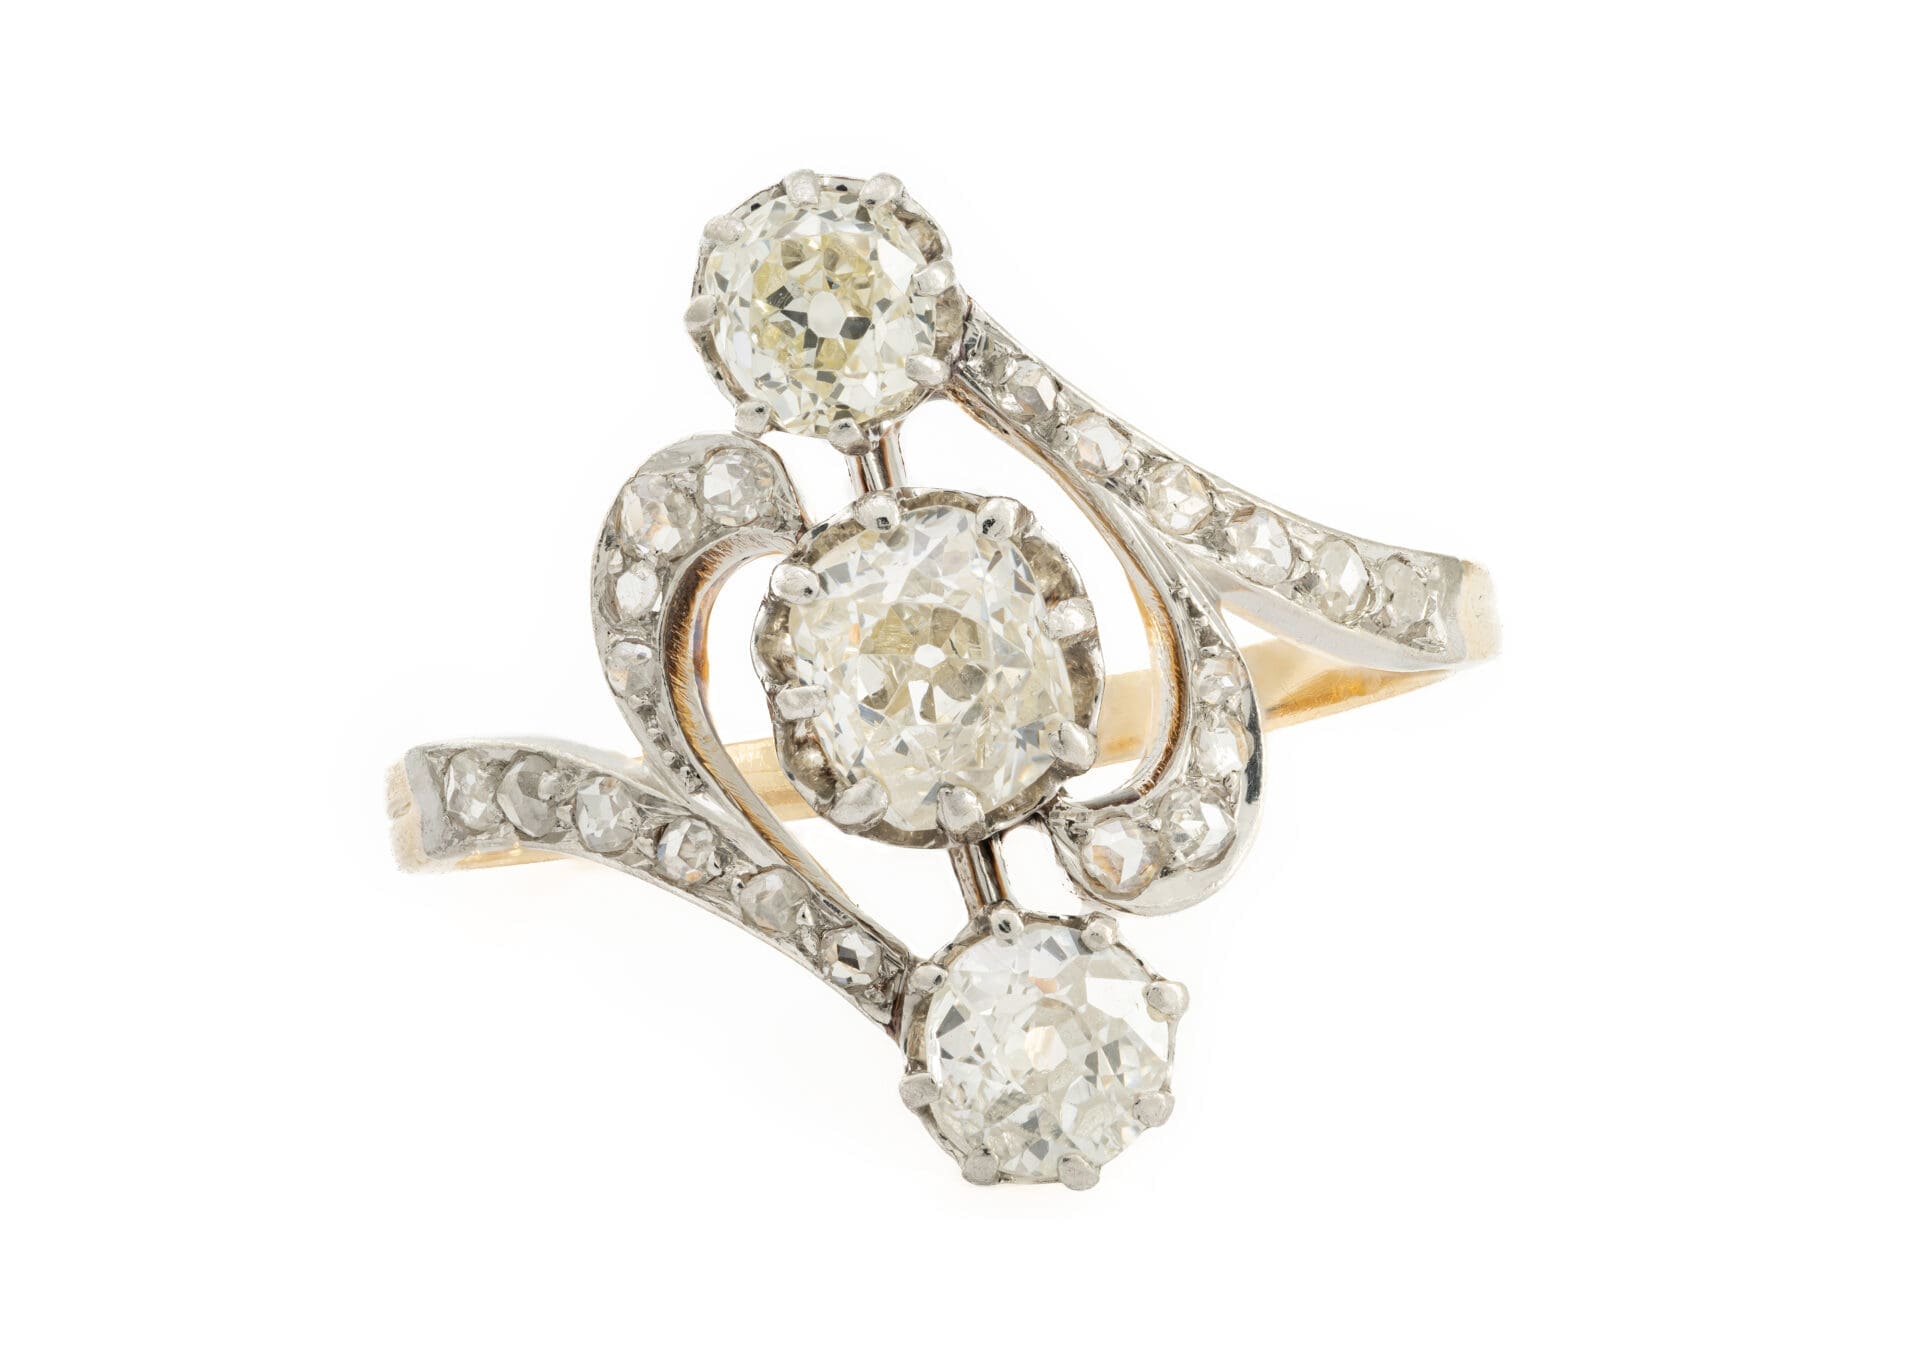 Product Photograhy for Federal Way Custom Jewelers